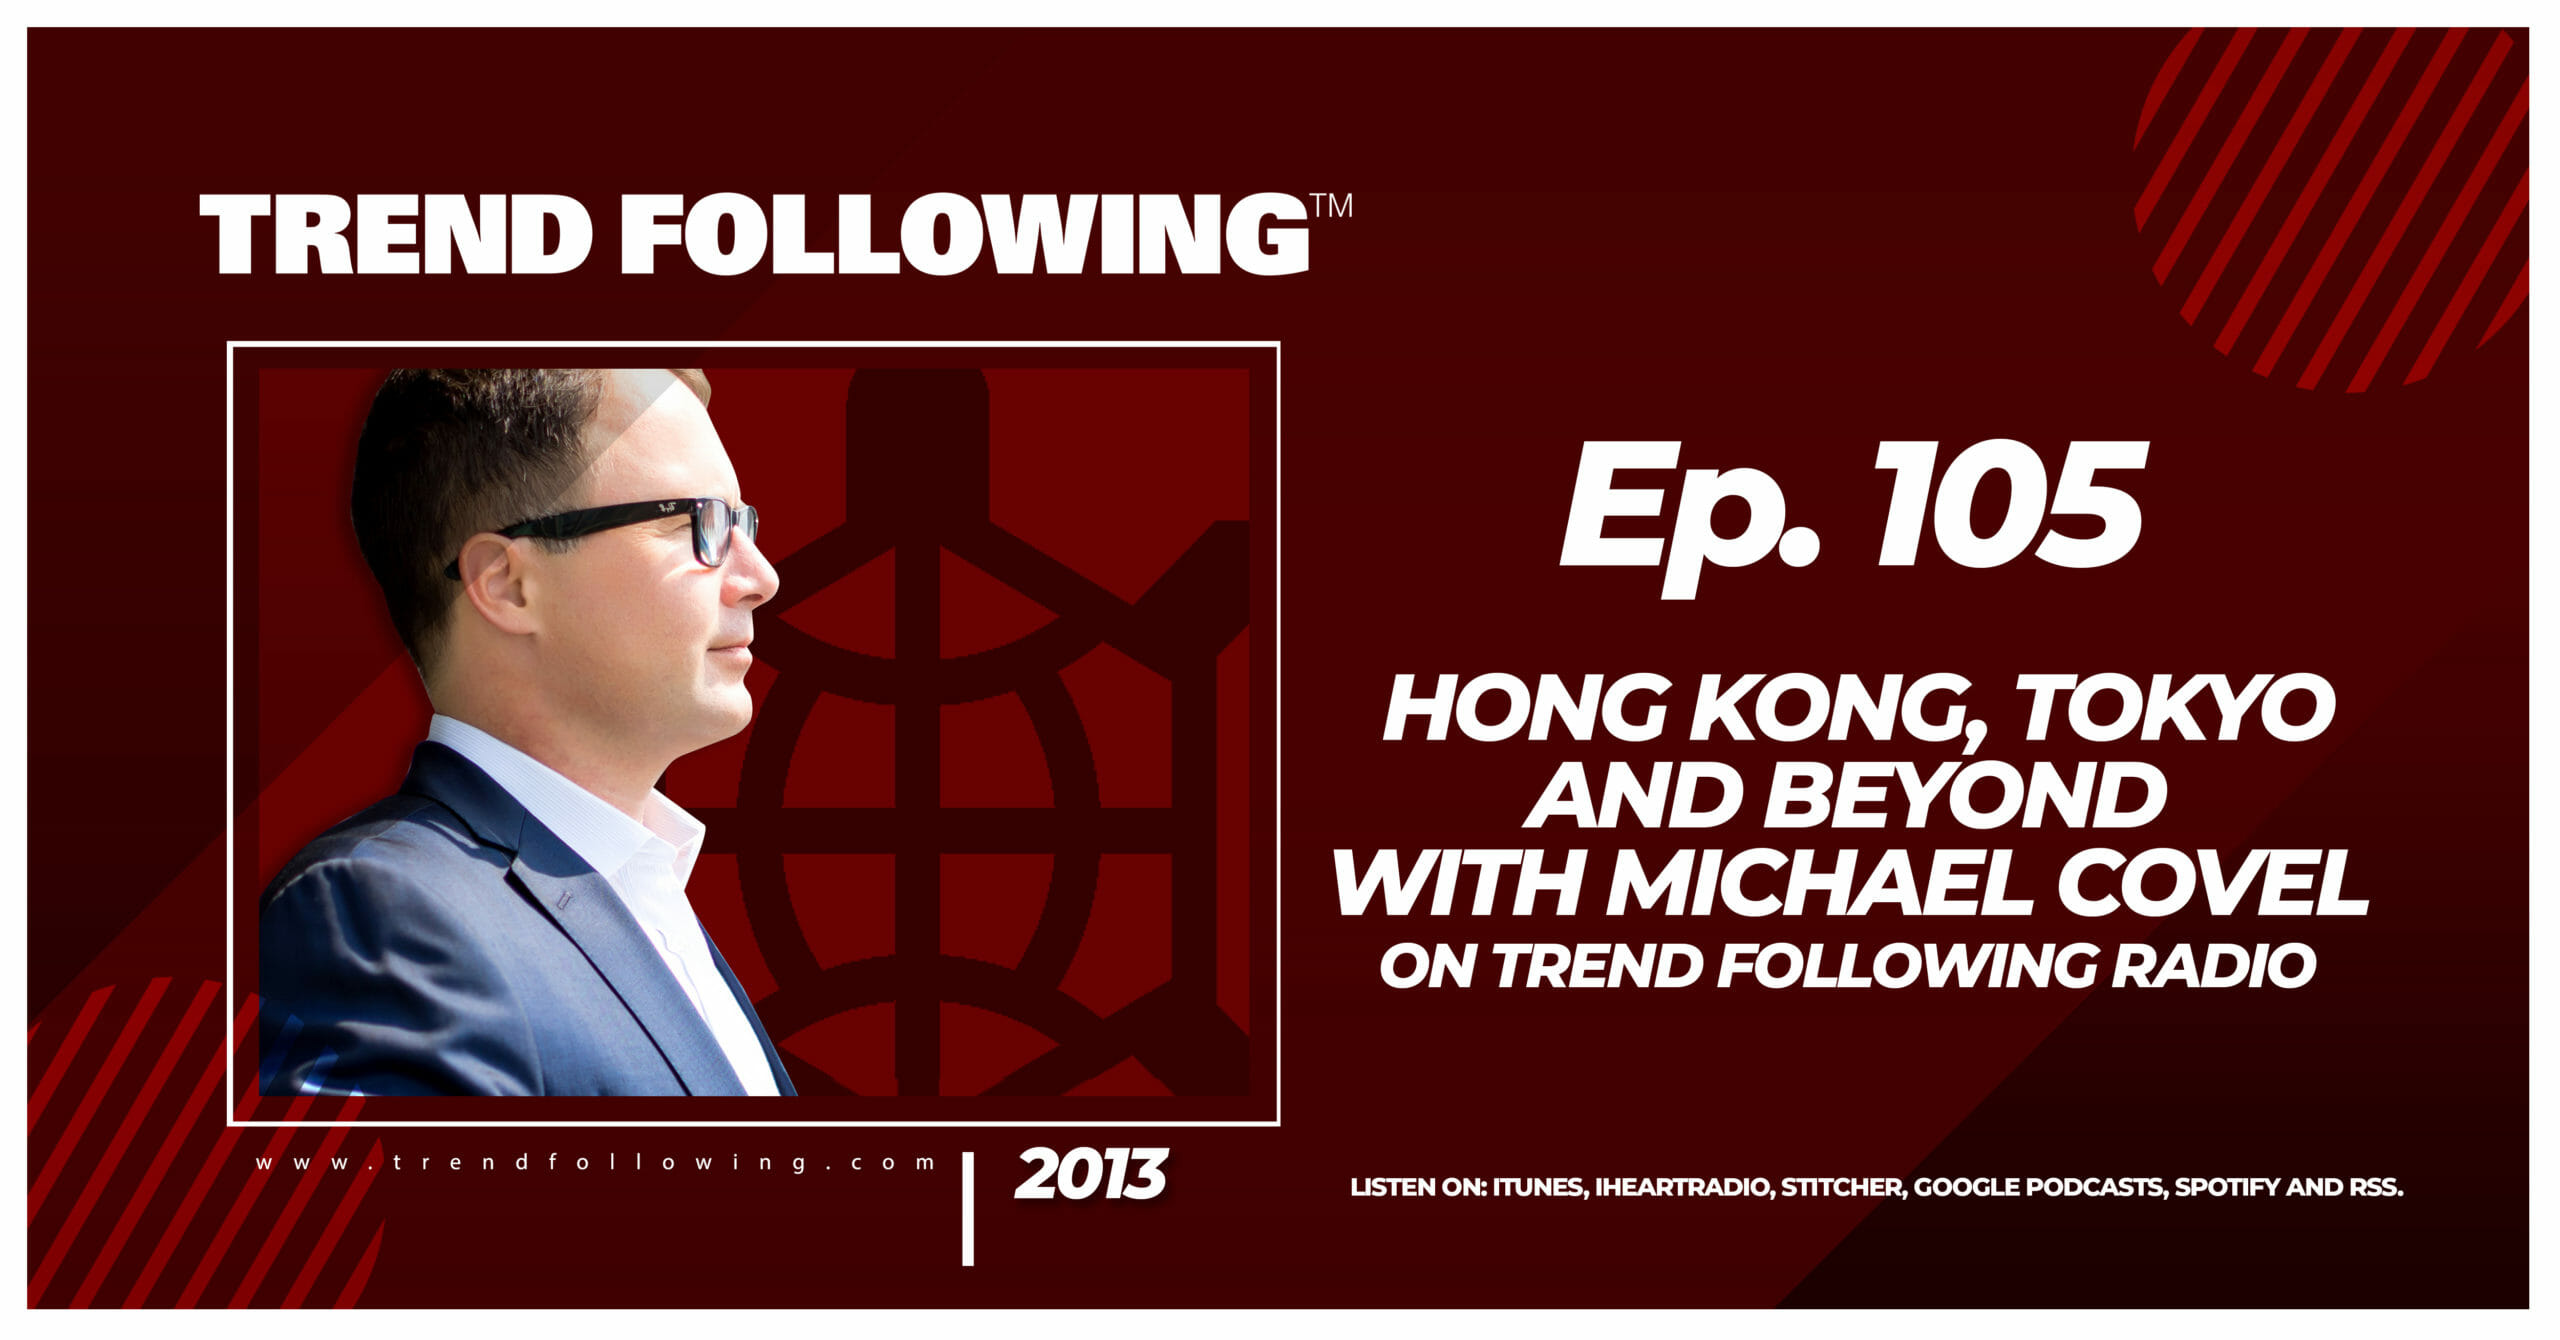 Hong Kong, Tokyo and Beyond with Michael Covel on Trend Following Radio